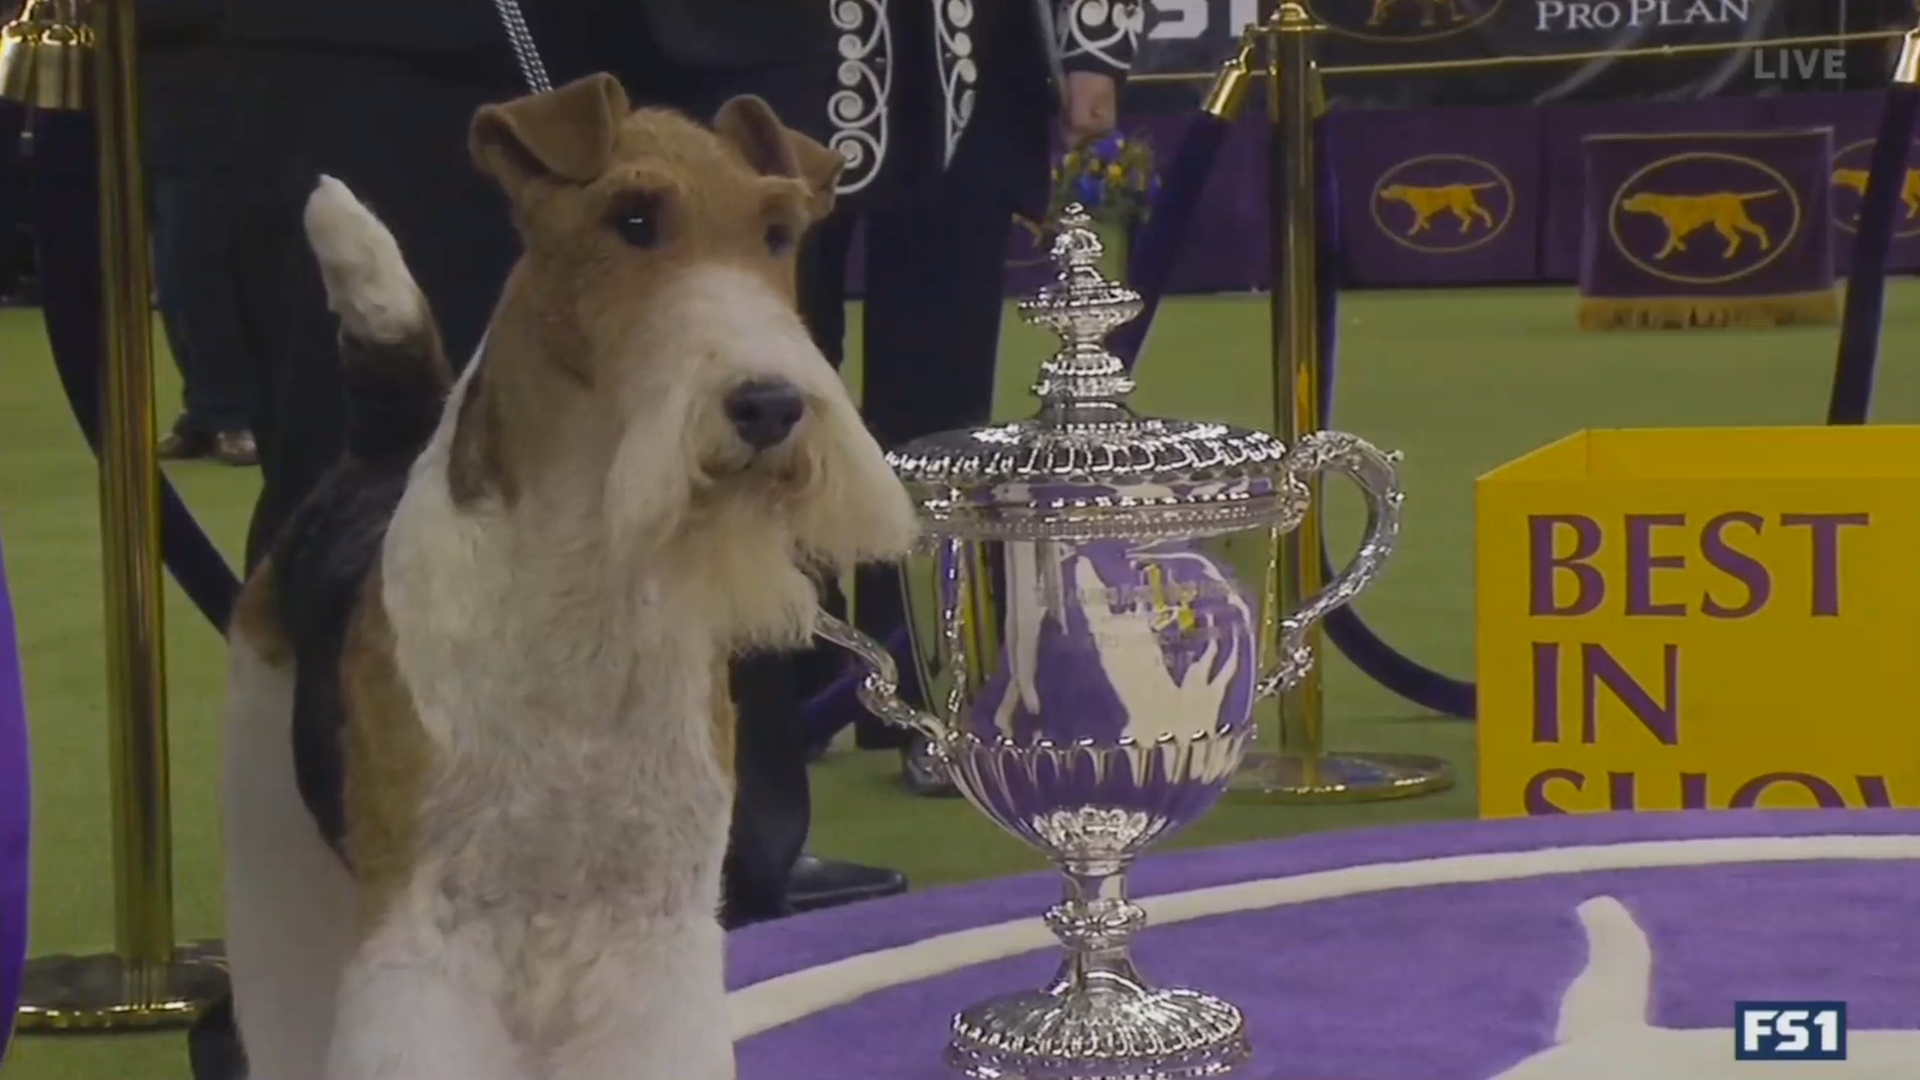 Wire Fox Terrier claims Best in Show amid controversy at Westminster Dog Show [Video]1920 x 1080